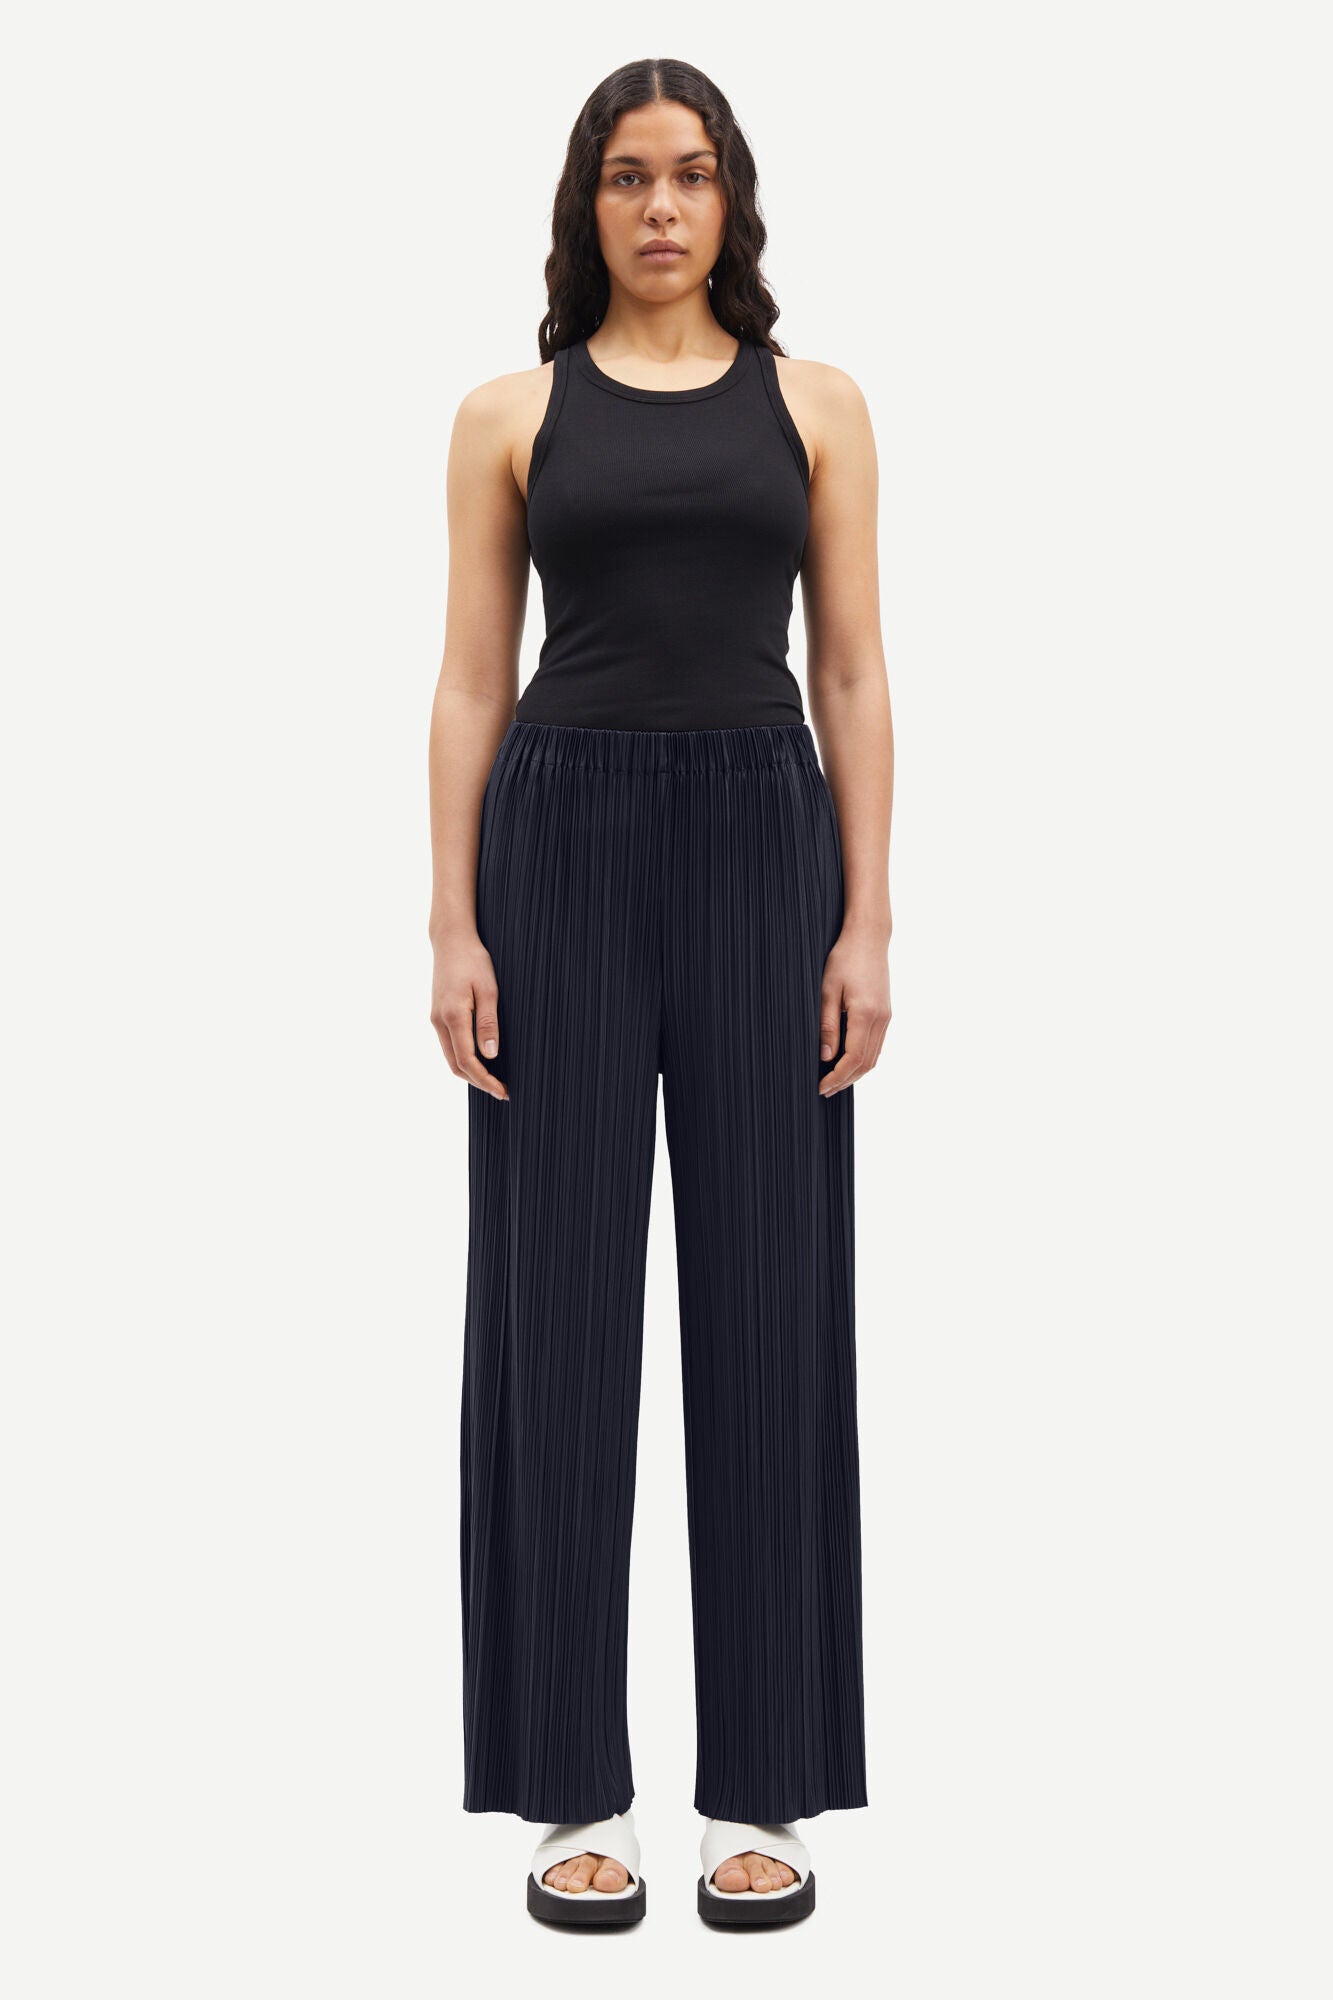 Pleated trousers in night sky